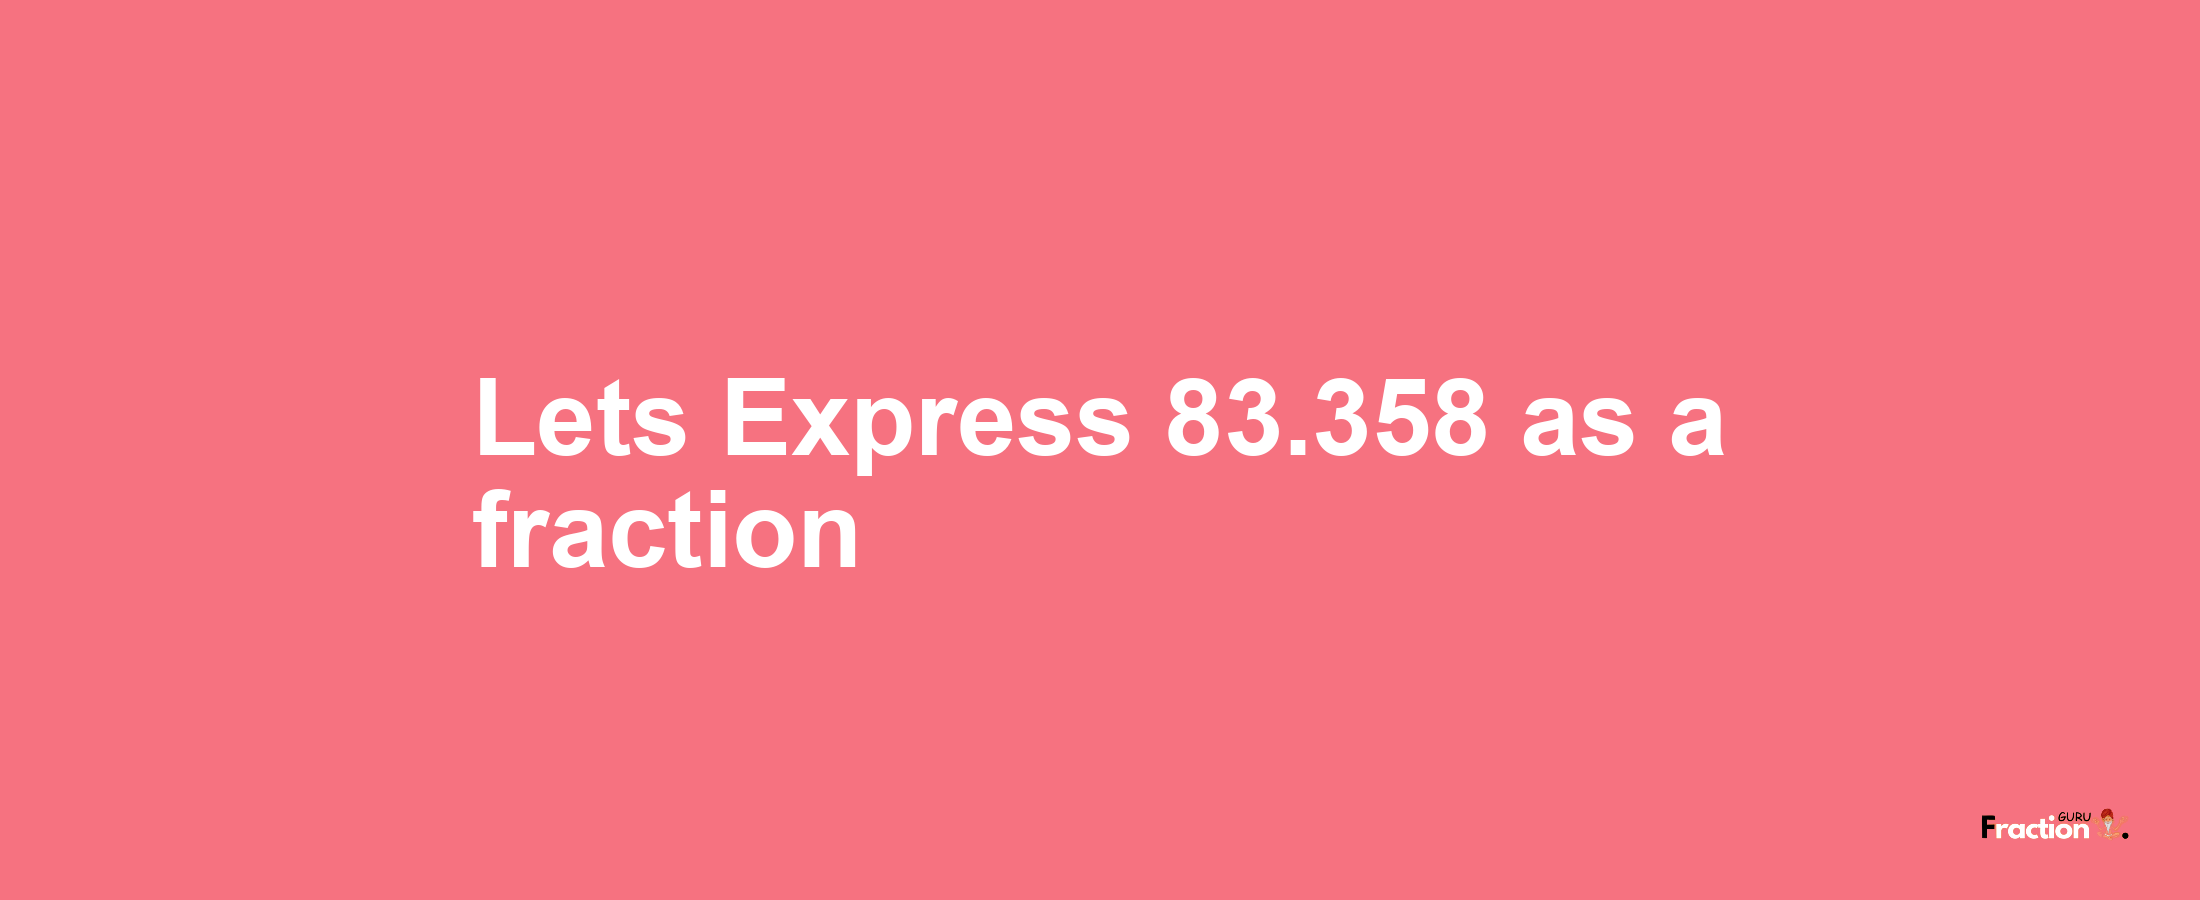 Lets Express 83.358 as afraction